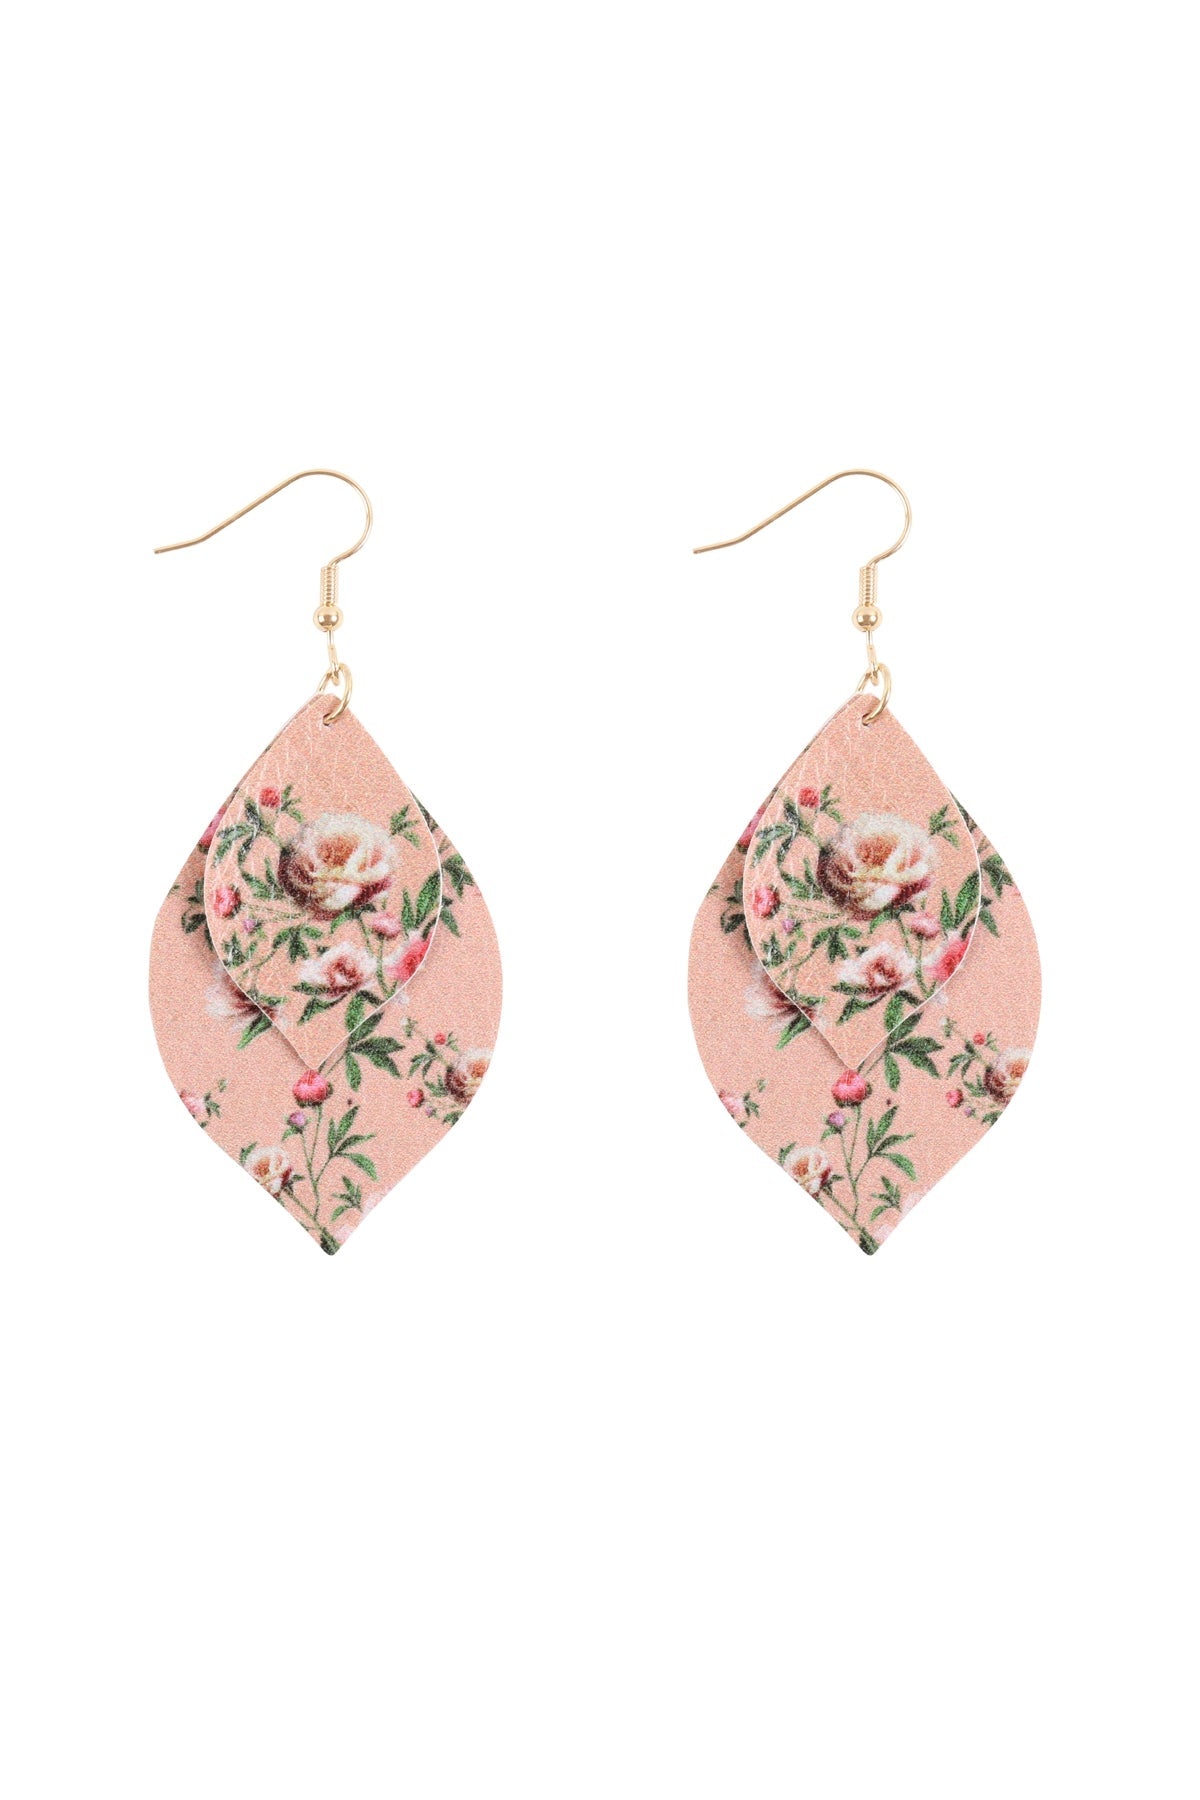 TWO FLORAL MARQUISE DROP EARRINGS (NOW $1.00 ONLY!)